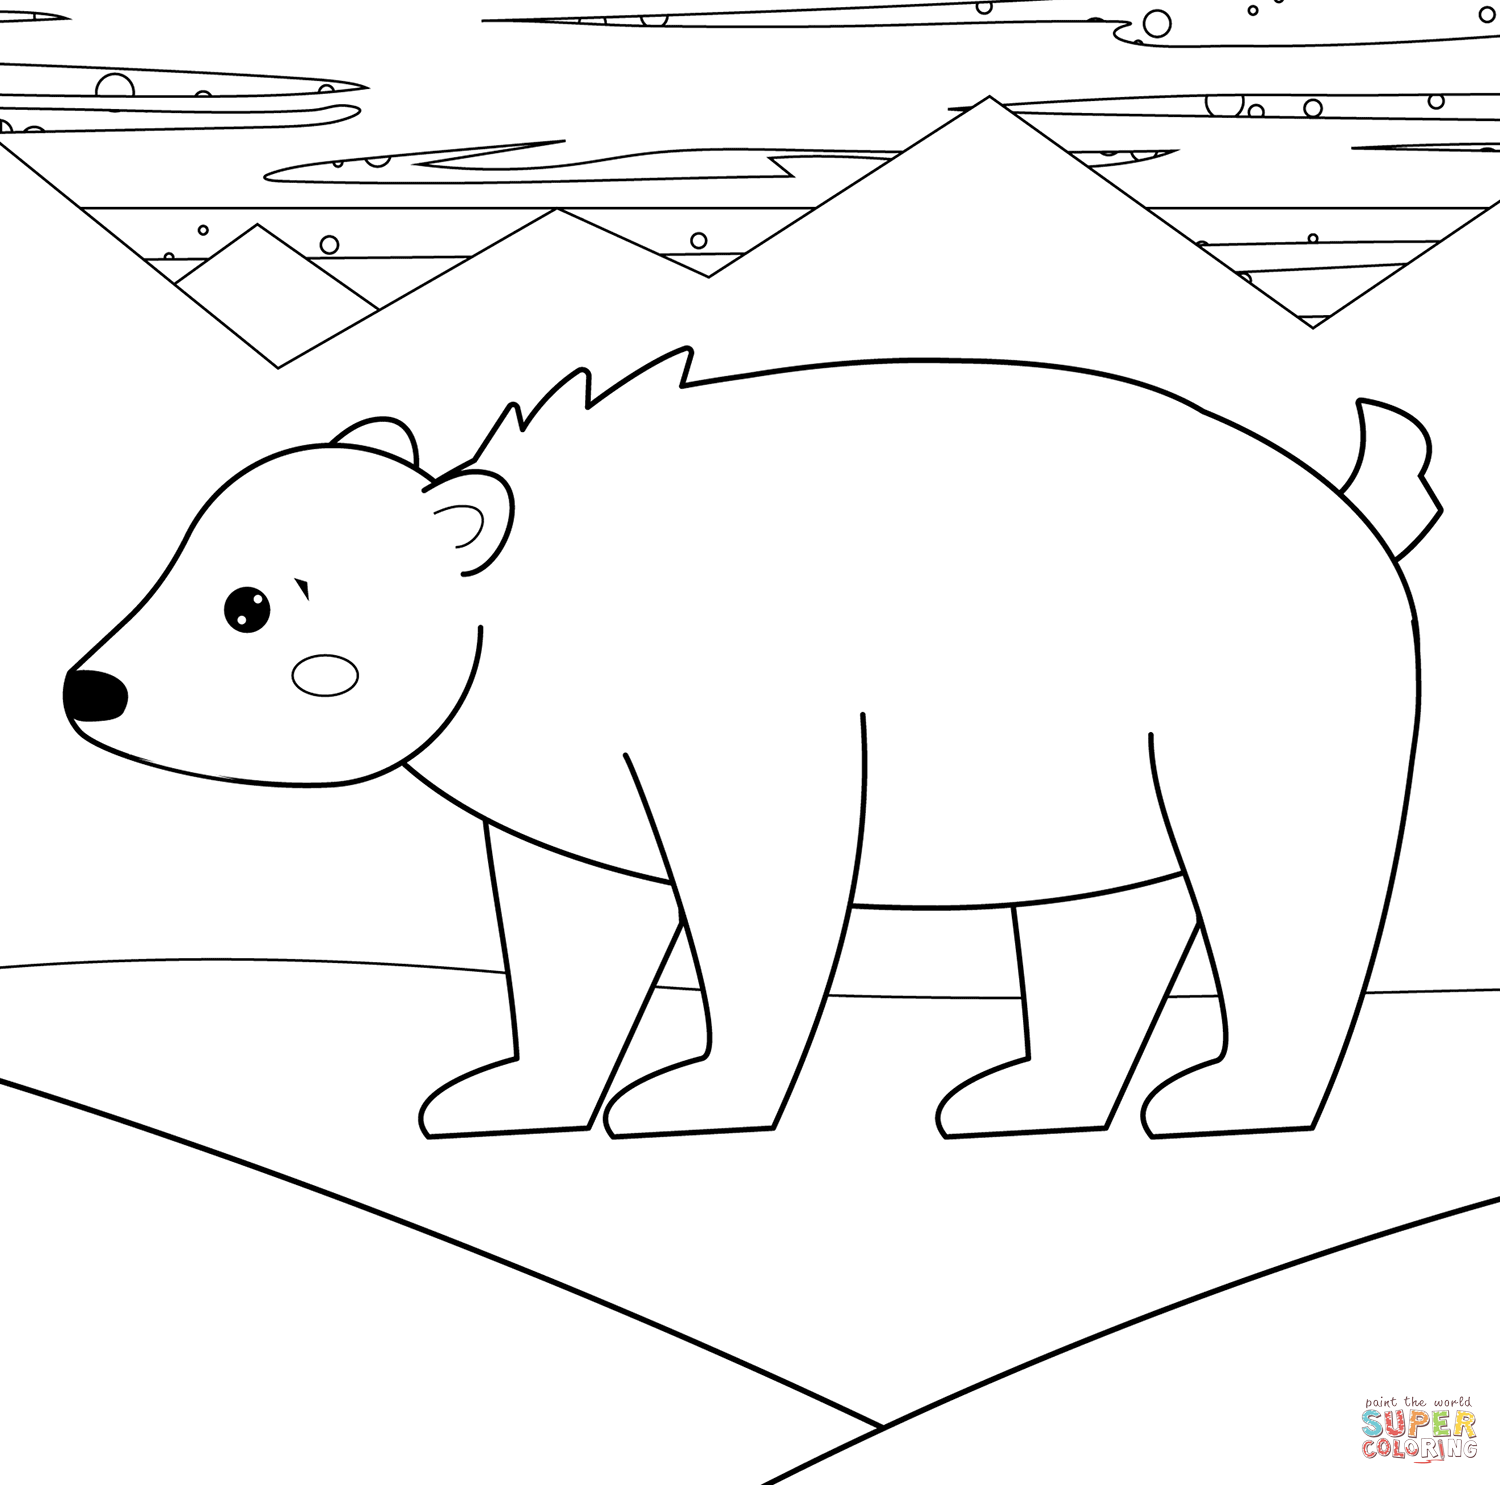 Polar bear coloring page free printable coloring pages